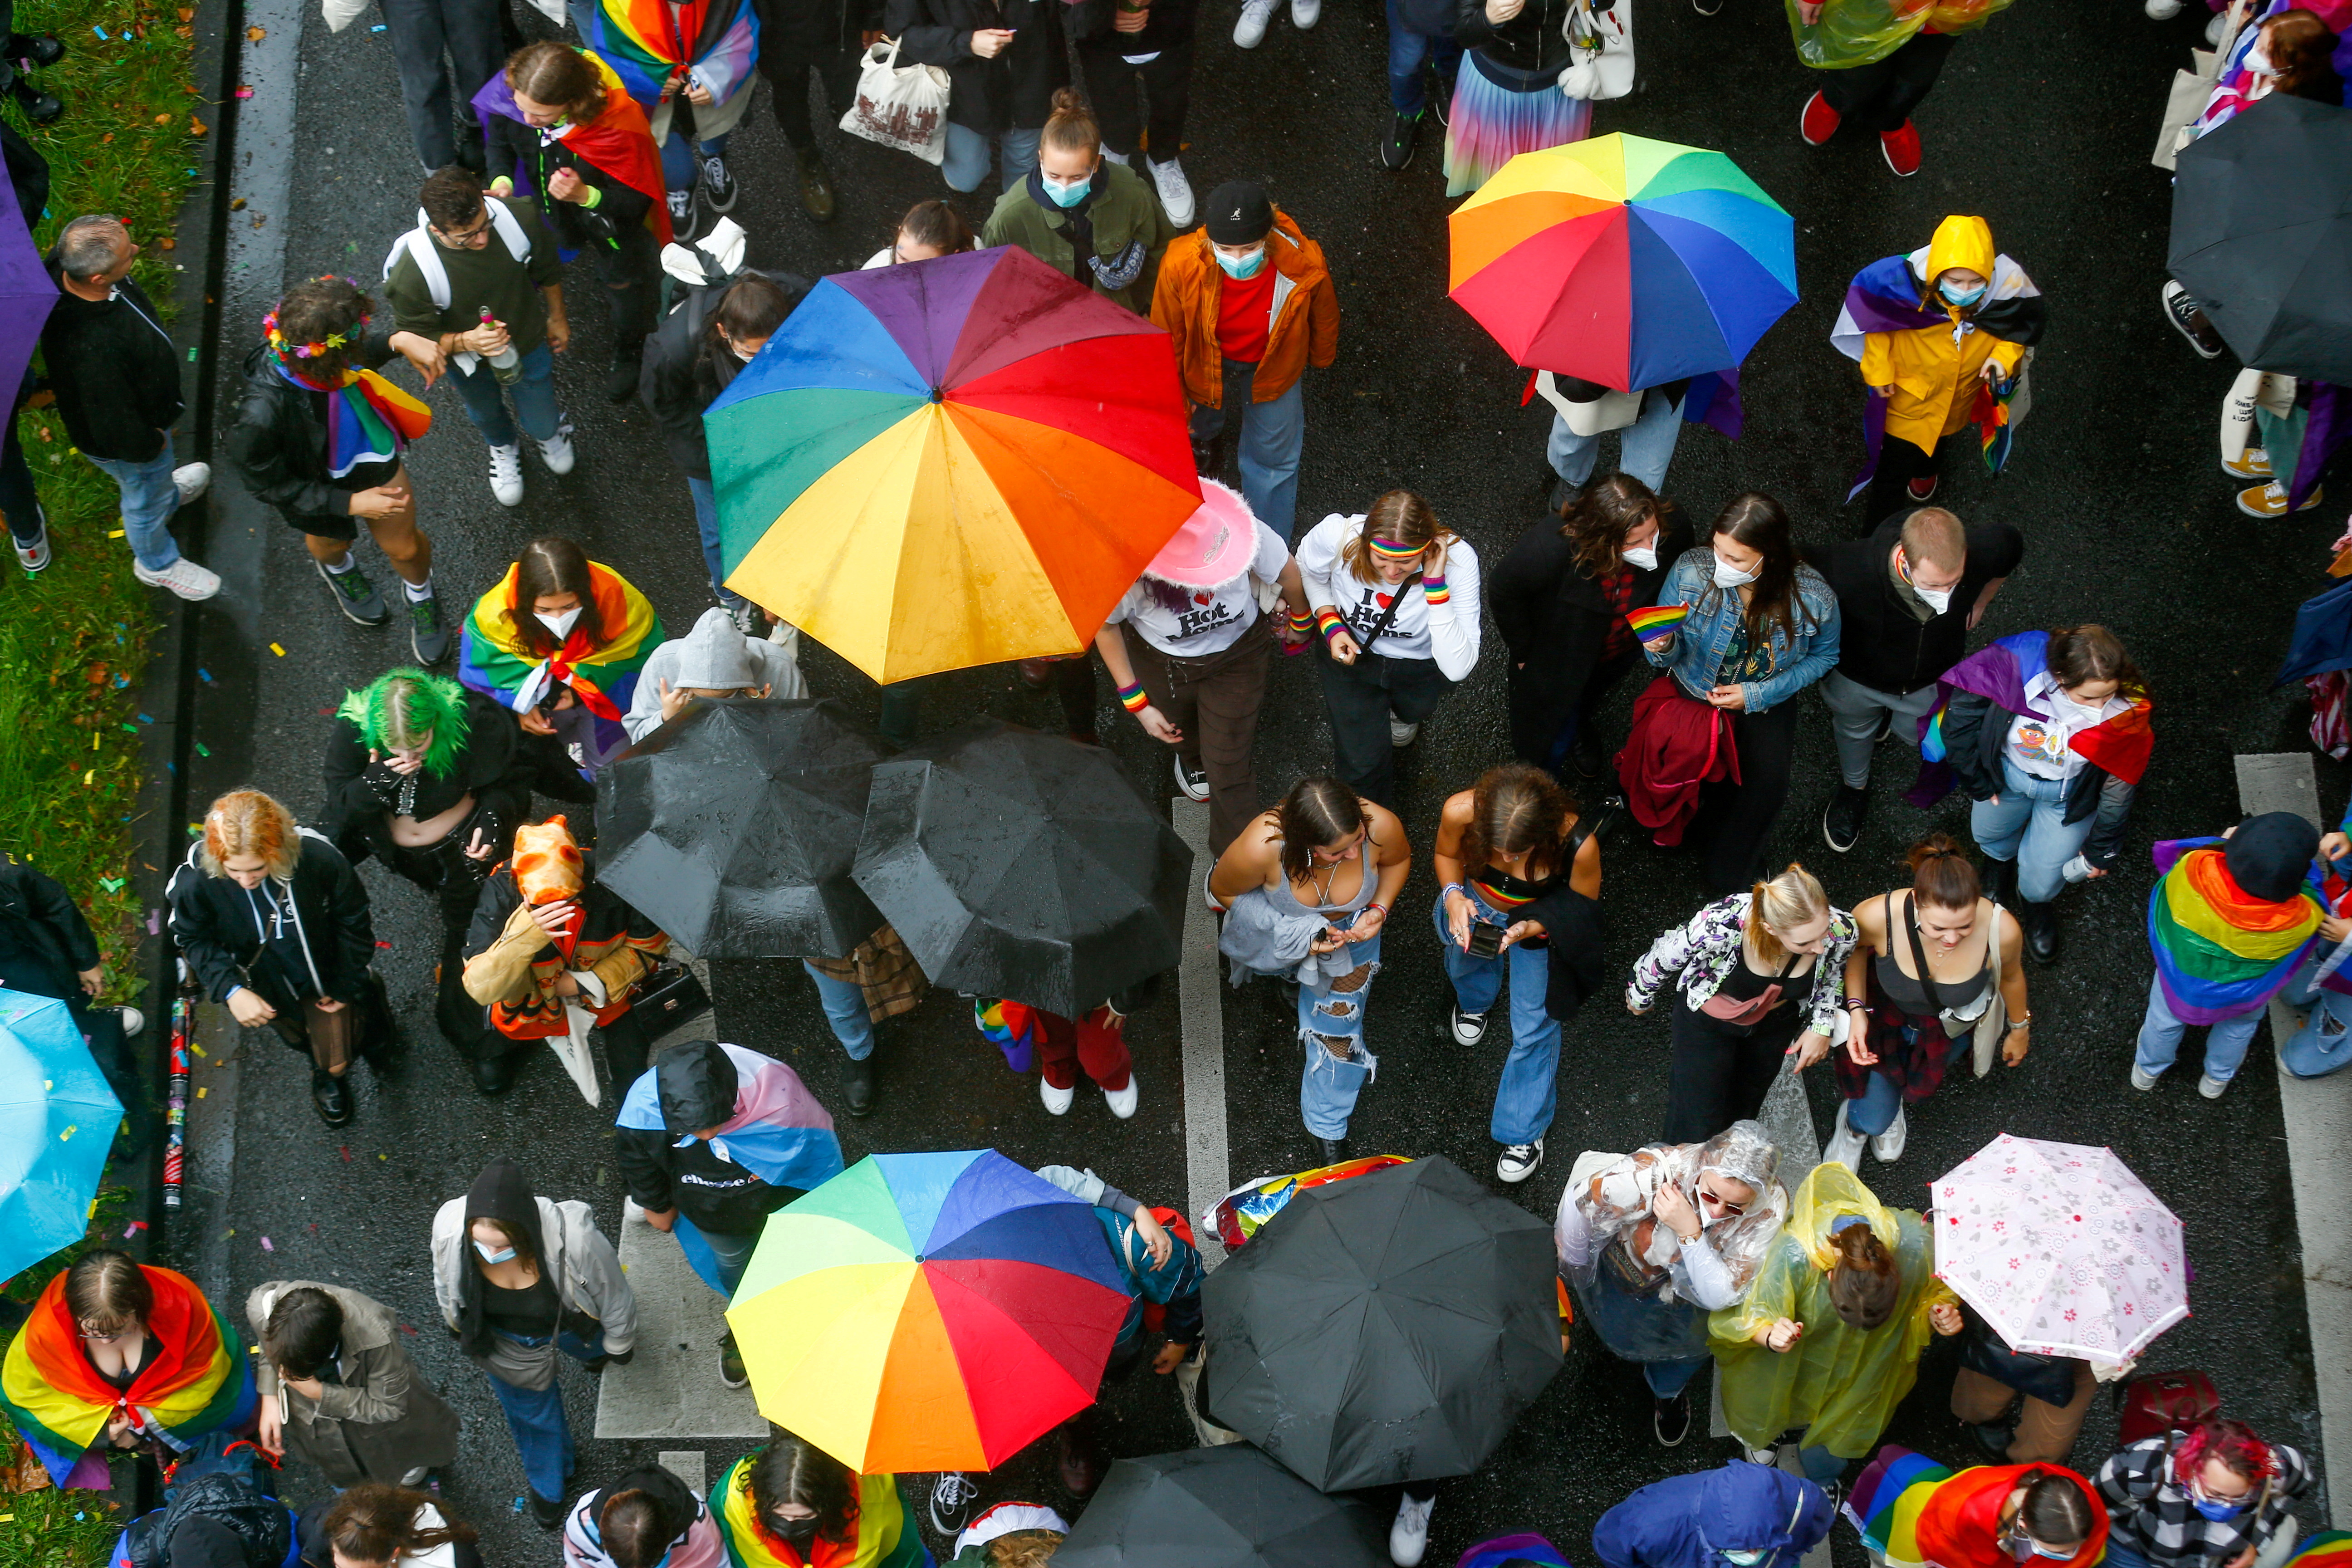 People take part in the Christopher Street Day (CSD) Gay Pride parade, in Cologne, Germany, August 29, 2021. REUTERS/Thilo Schmuelgen/File Photo